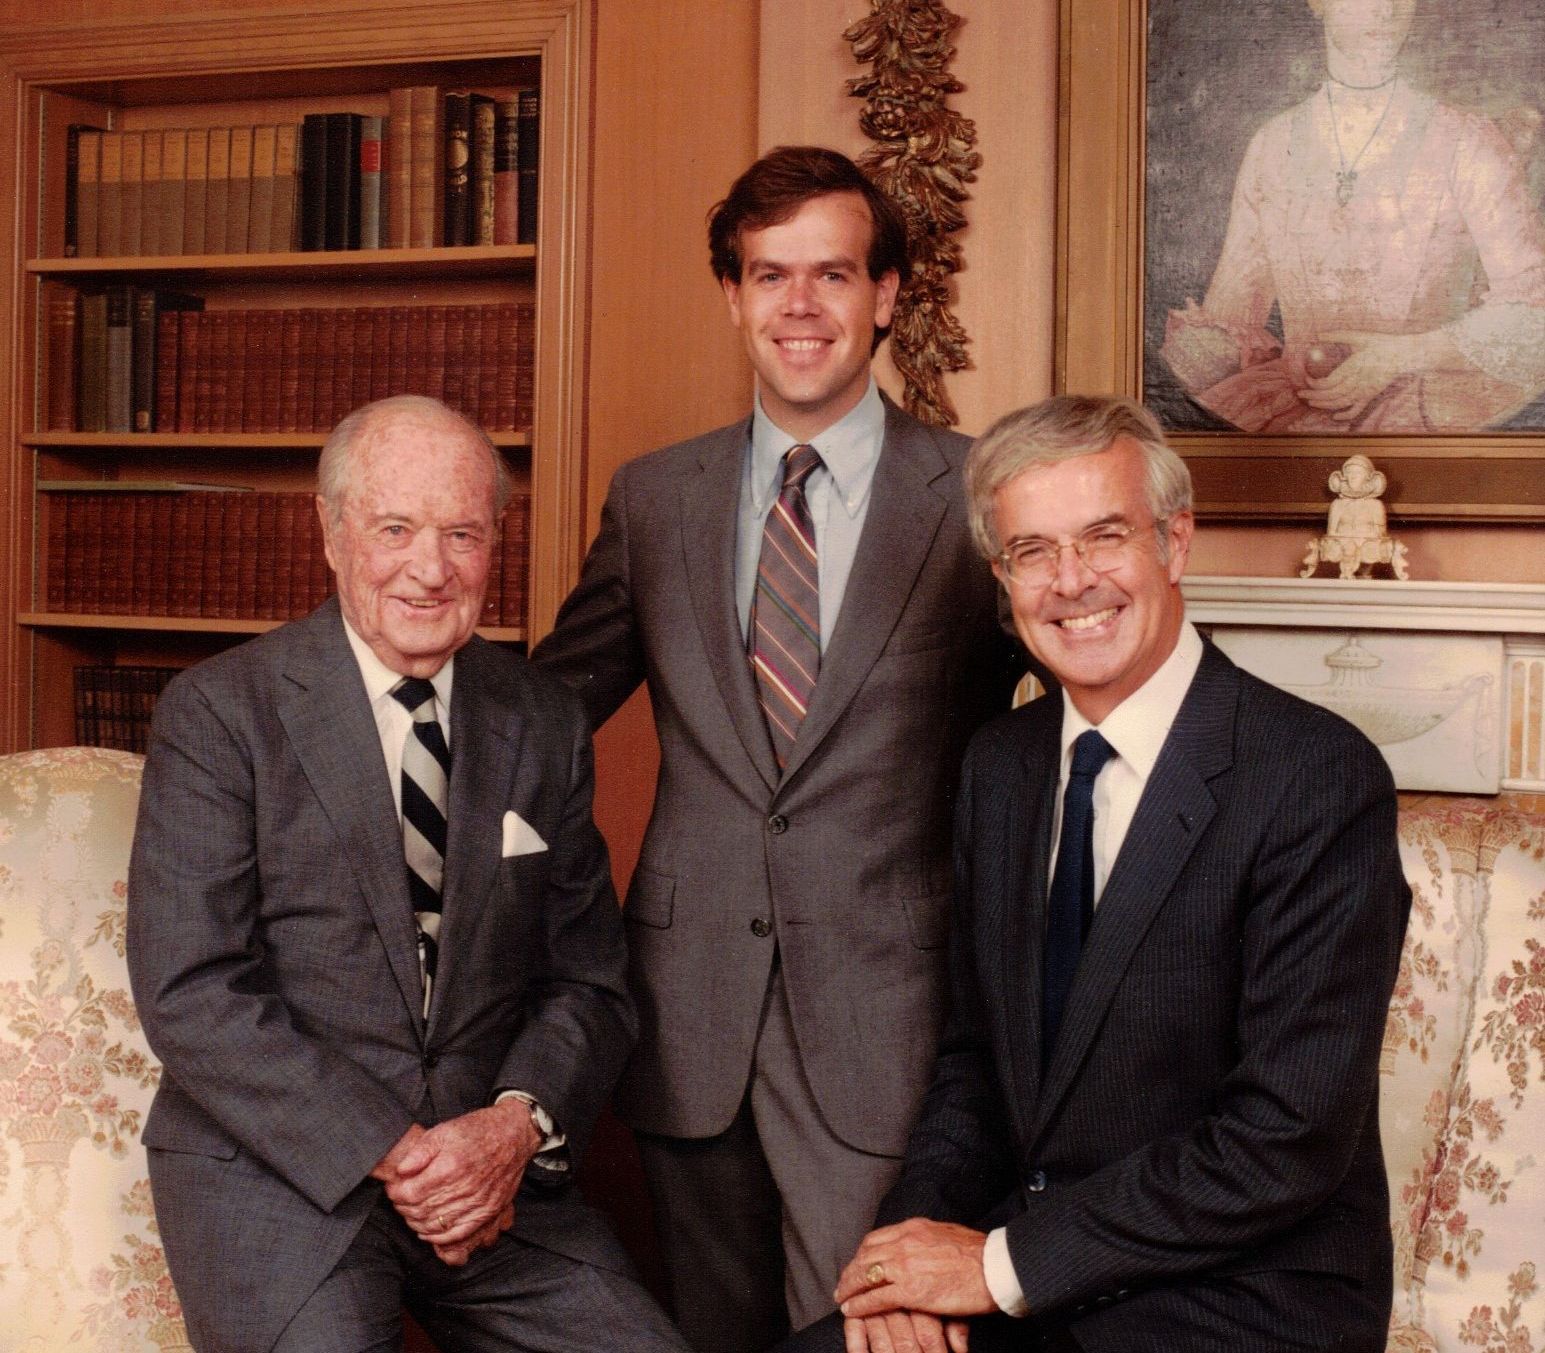 Bill McDonnell, Randy McDonnell and Sandy McDonnell